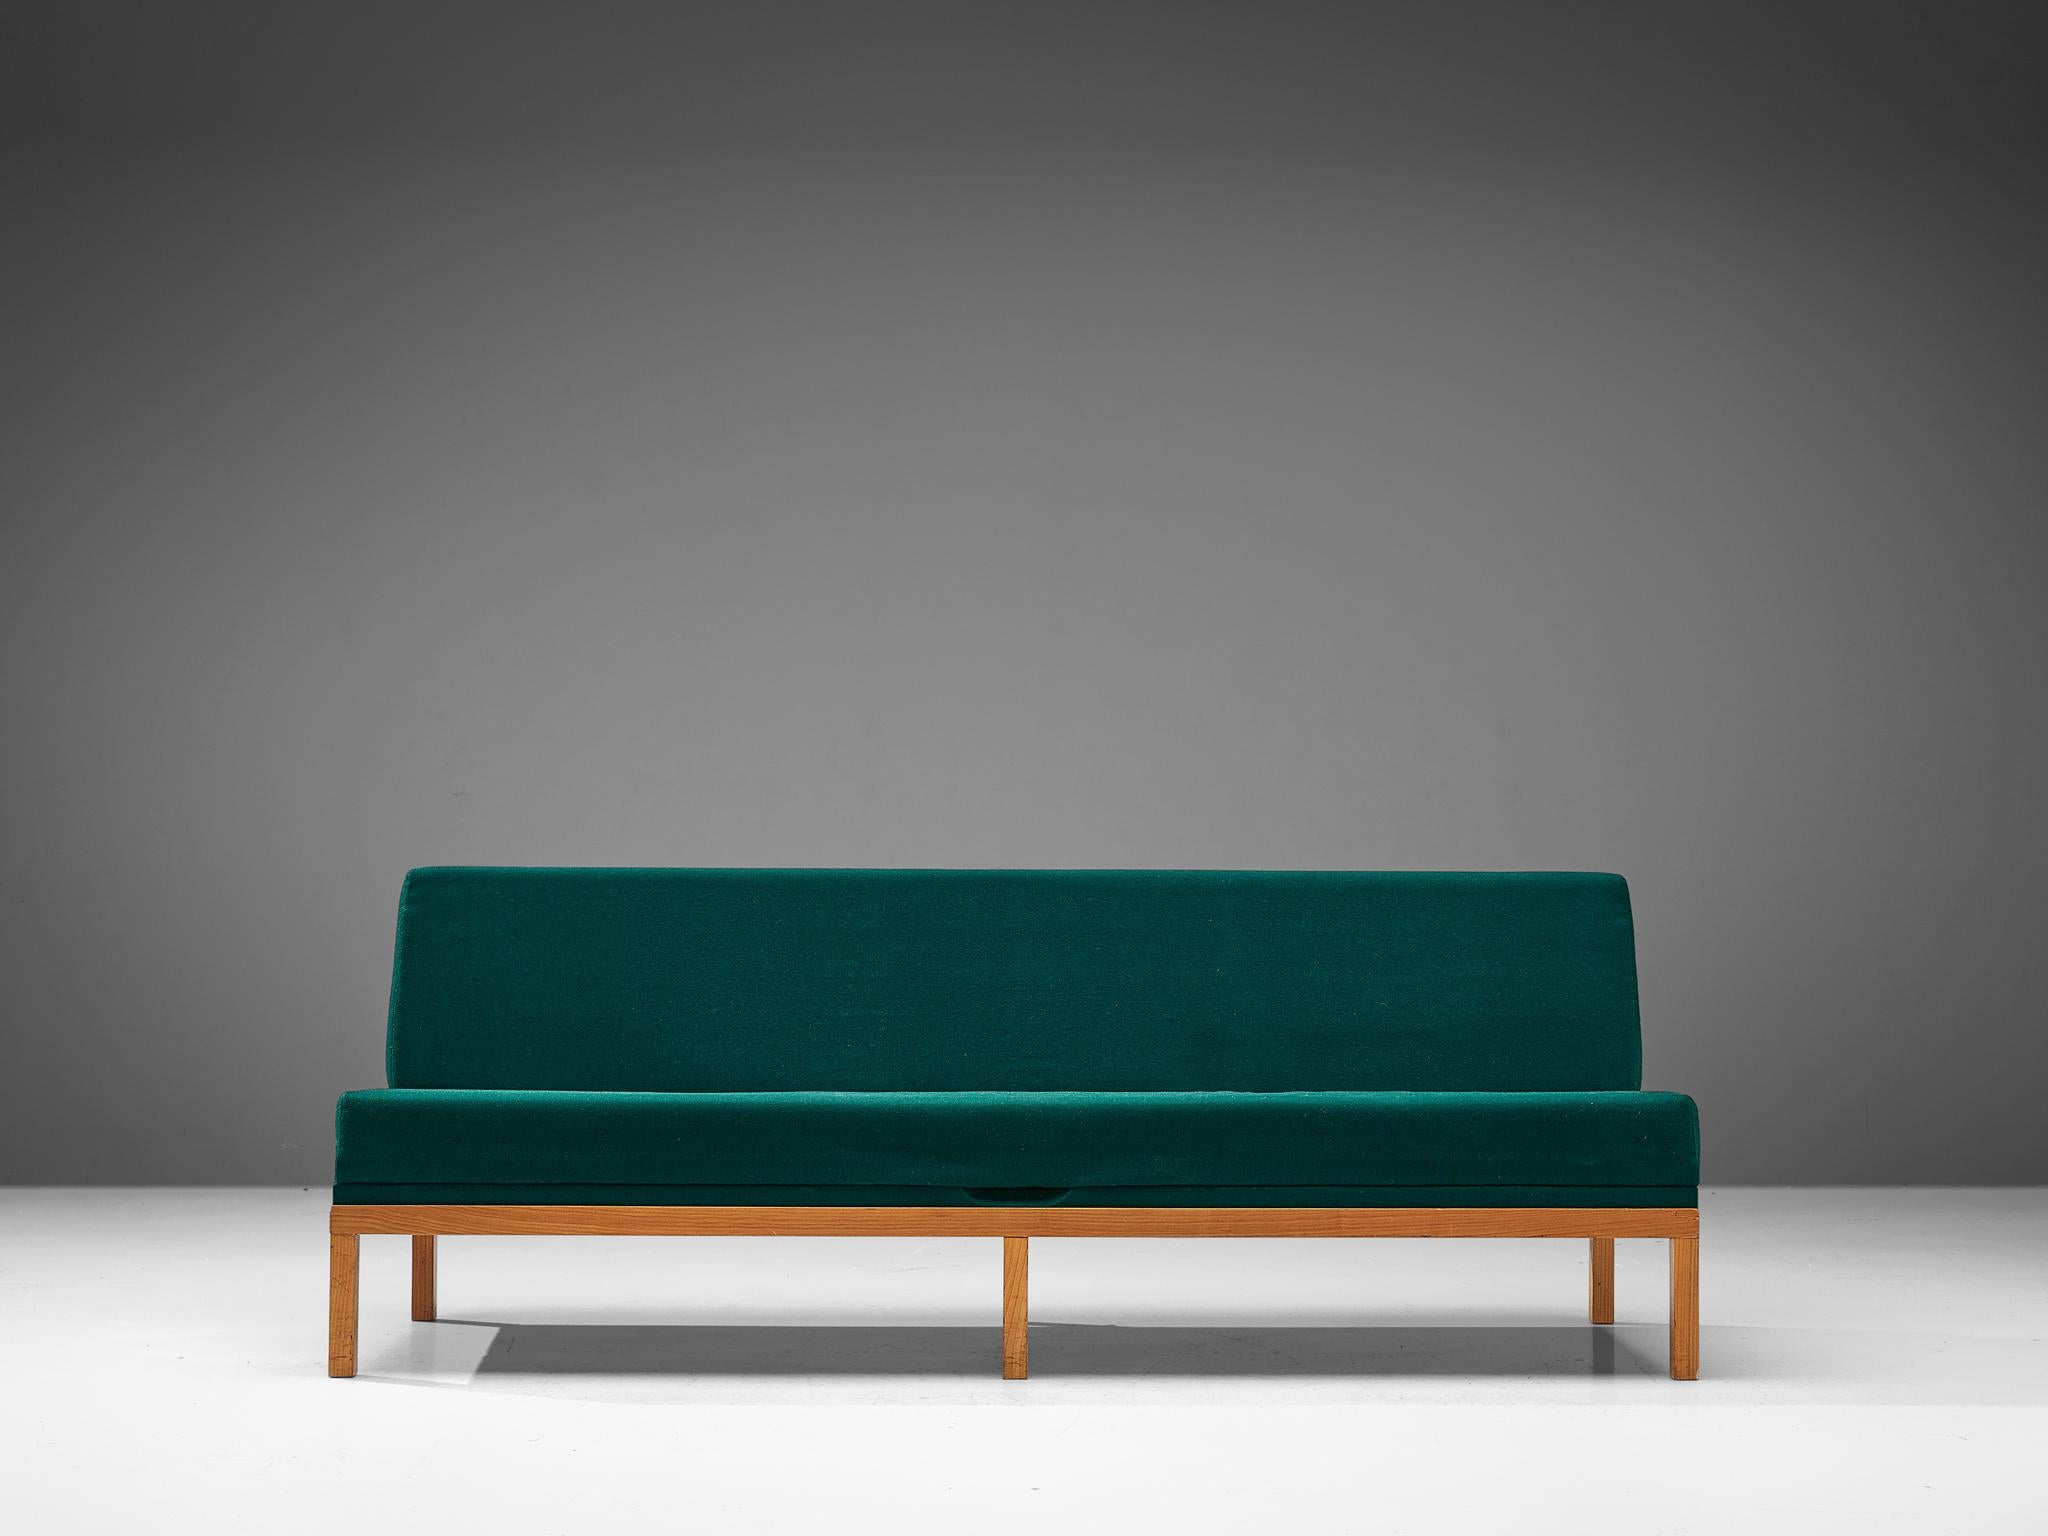 Mid-20th Century Johannes Spalt 'Constanze' Daybed in Green Upholstery